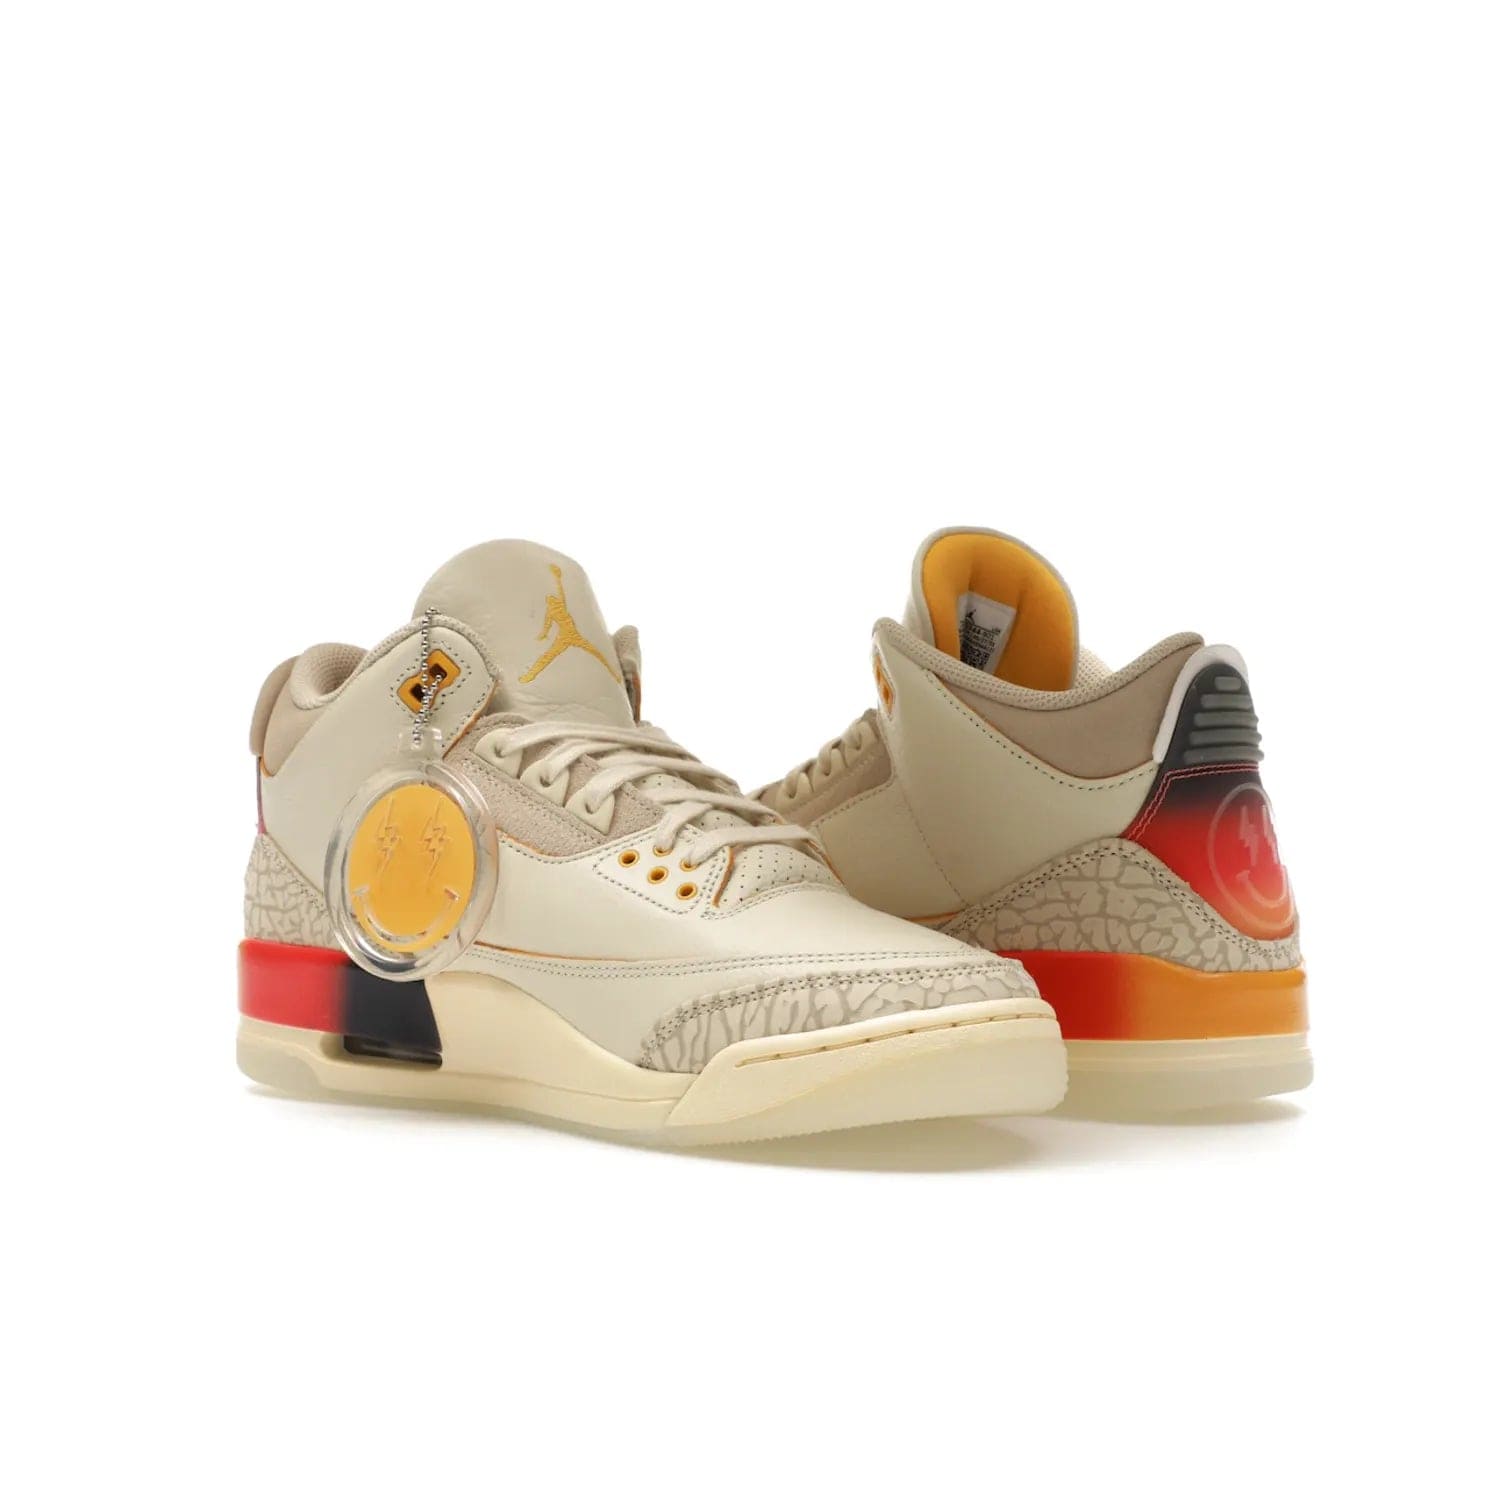 Jordan 3 Retro SP J Balvin Medellín Sunset - Image 23 - Only at www.BallersClubKickz.com - J Balvin x Jordan 3 Retro SP: Celebrate the joy of life with a colorful, homage to the electrifying reggaeton culture and iconic Jordan 3. Limited edition, Sept. 23. $250.